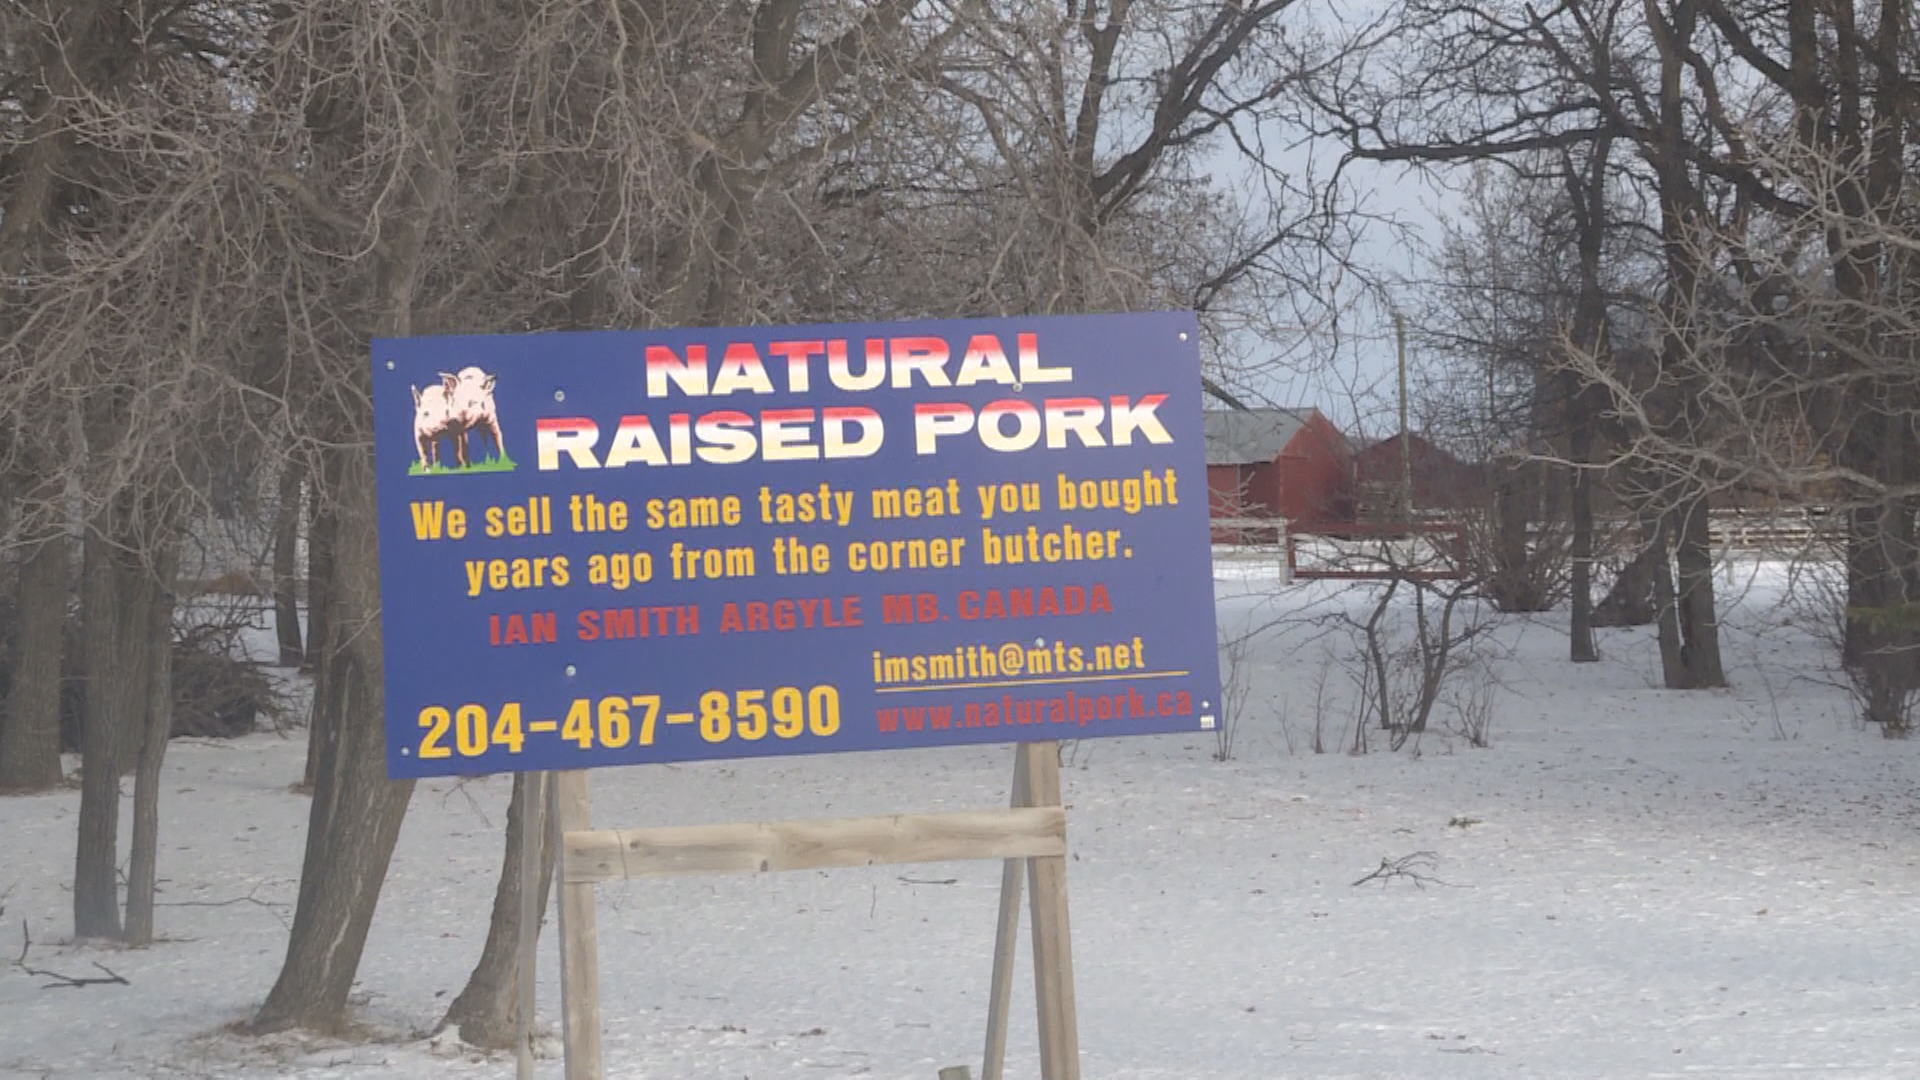 Argyle, MB, farmer Ian Smith has been selling pork, beef, and eggs directly to customers for a number of years.